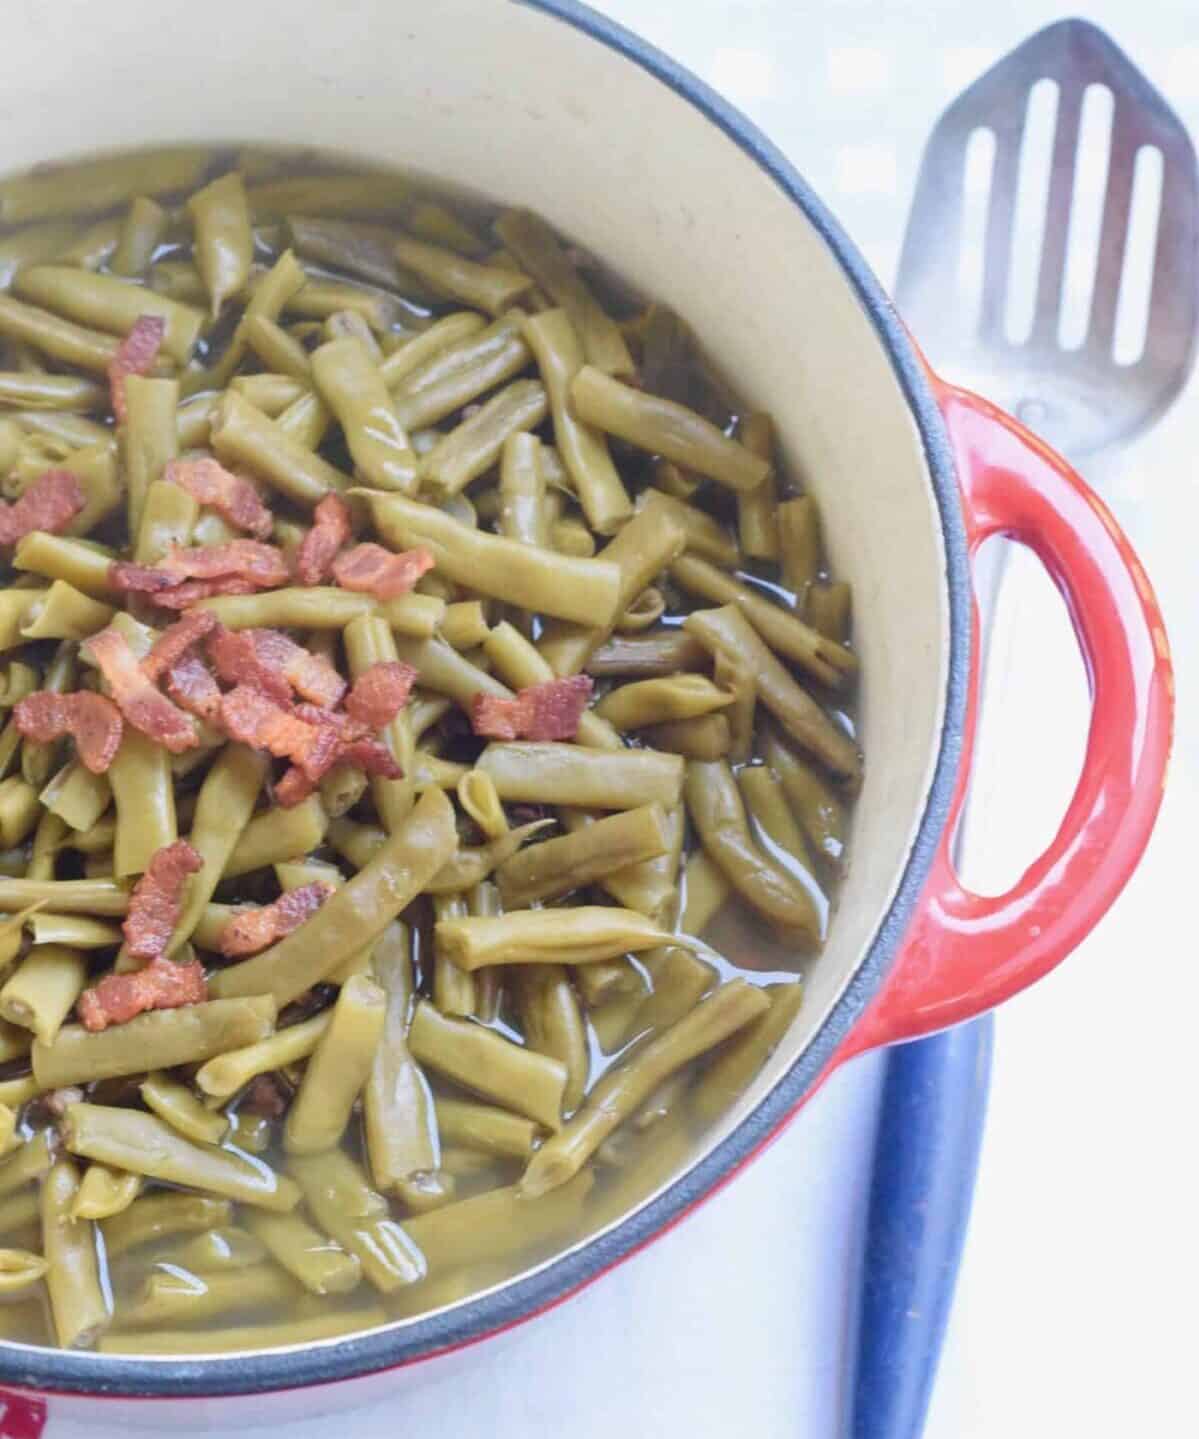 Red pan of green beans with bacon on top with blue slotted spoon on surface.